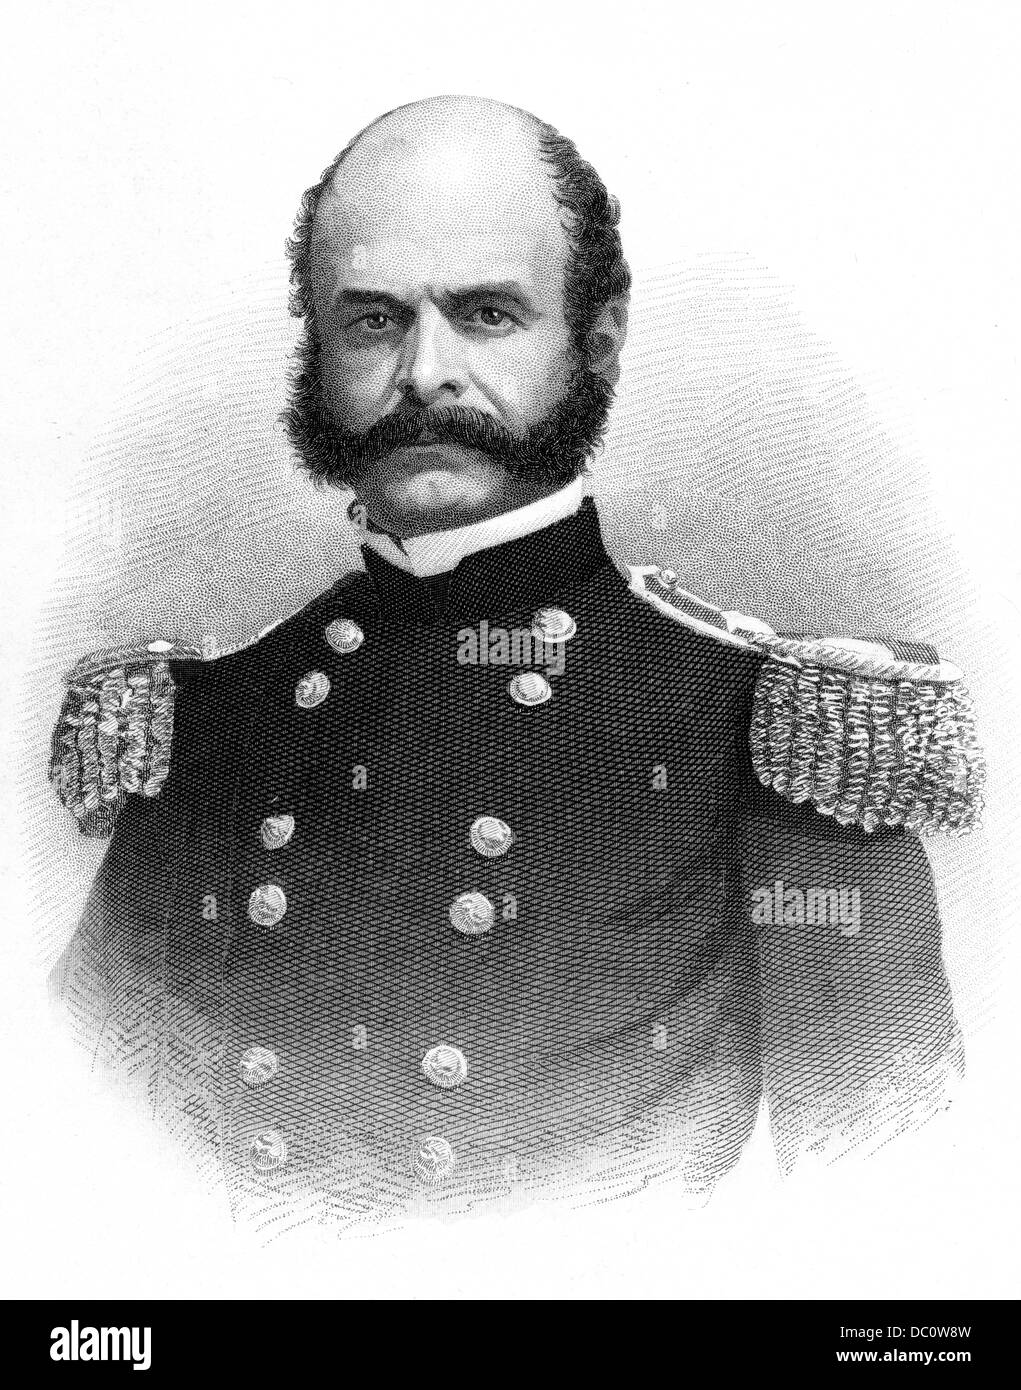 1800s 1860s PORTRAIT AMBROSE BURNSIDE GENERAL UNION ARMY AMERICAN CIVIL WAR INSPIRED WORD SIDEBURNS Stock Photo